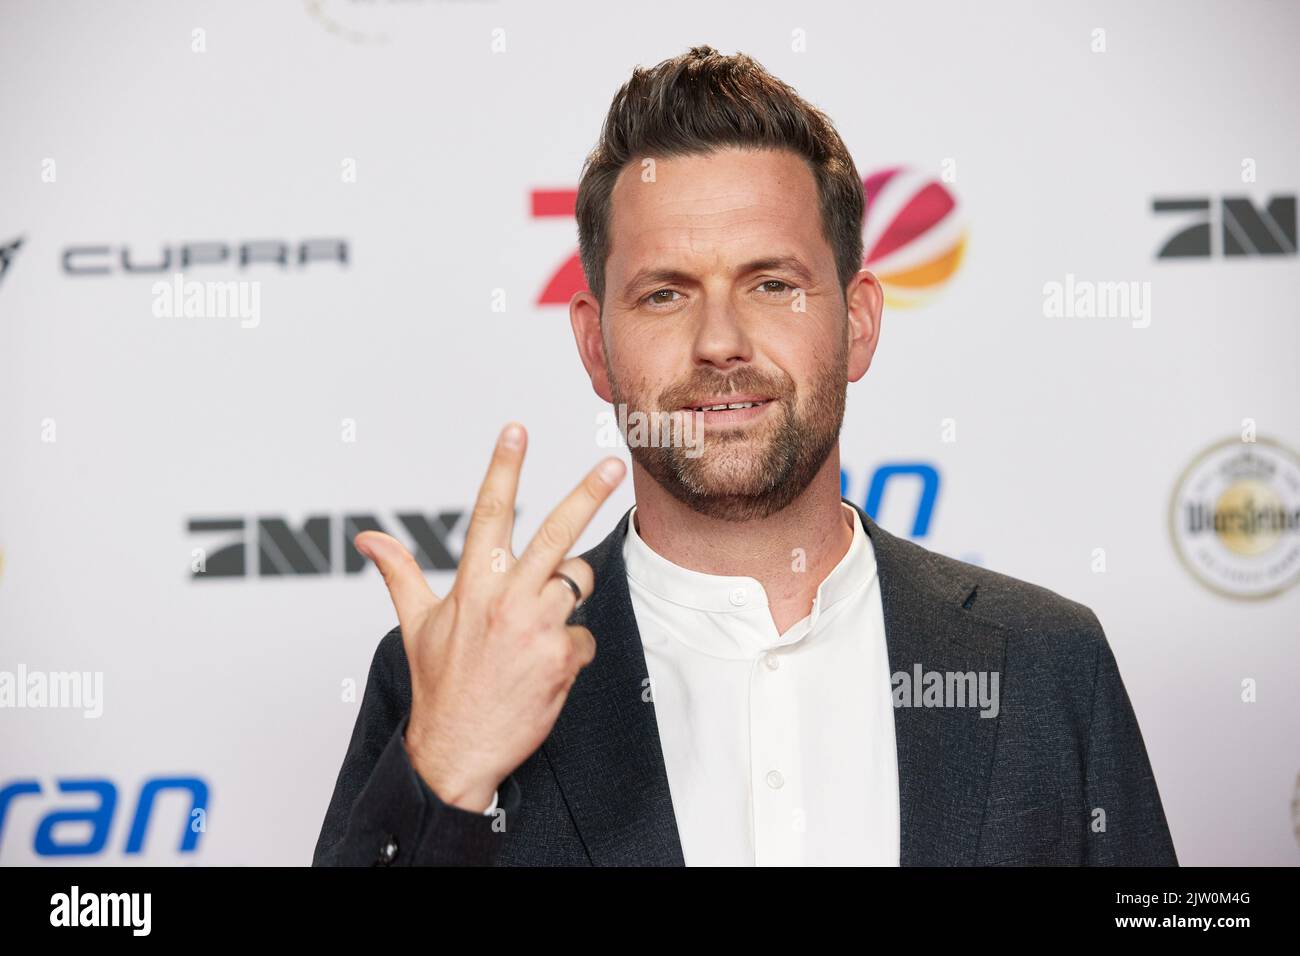 Hamburg, Germany. 02nd Sep, 2022. Matthias Killing, television host, stands on the red carpet at the photo call as part of the 30th anniversary of the Seven.One Entertainment brand. Credit: Georg Wendt/dpa/Alamy Live News Stock Photo